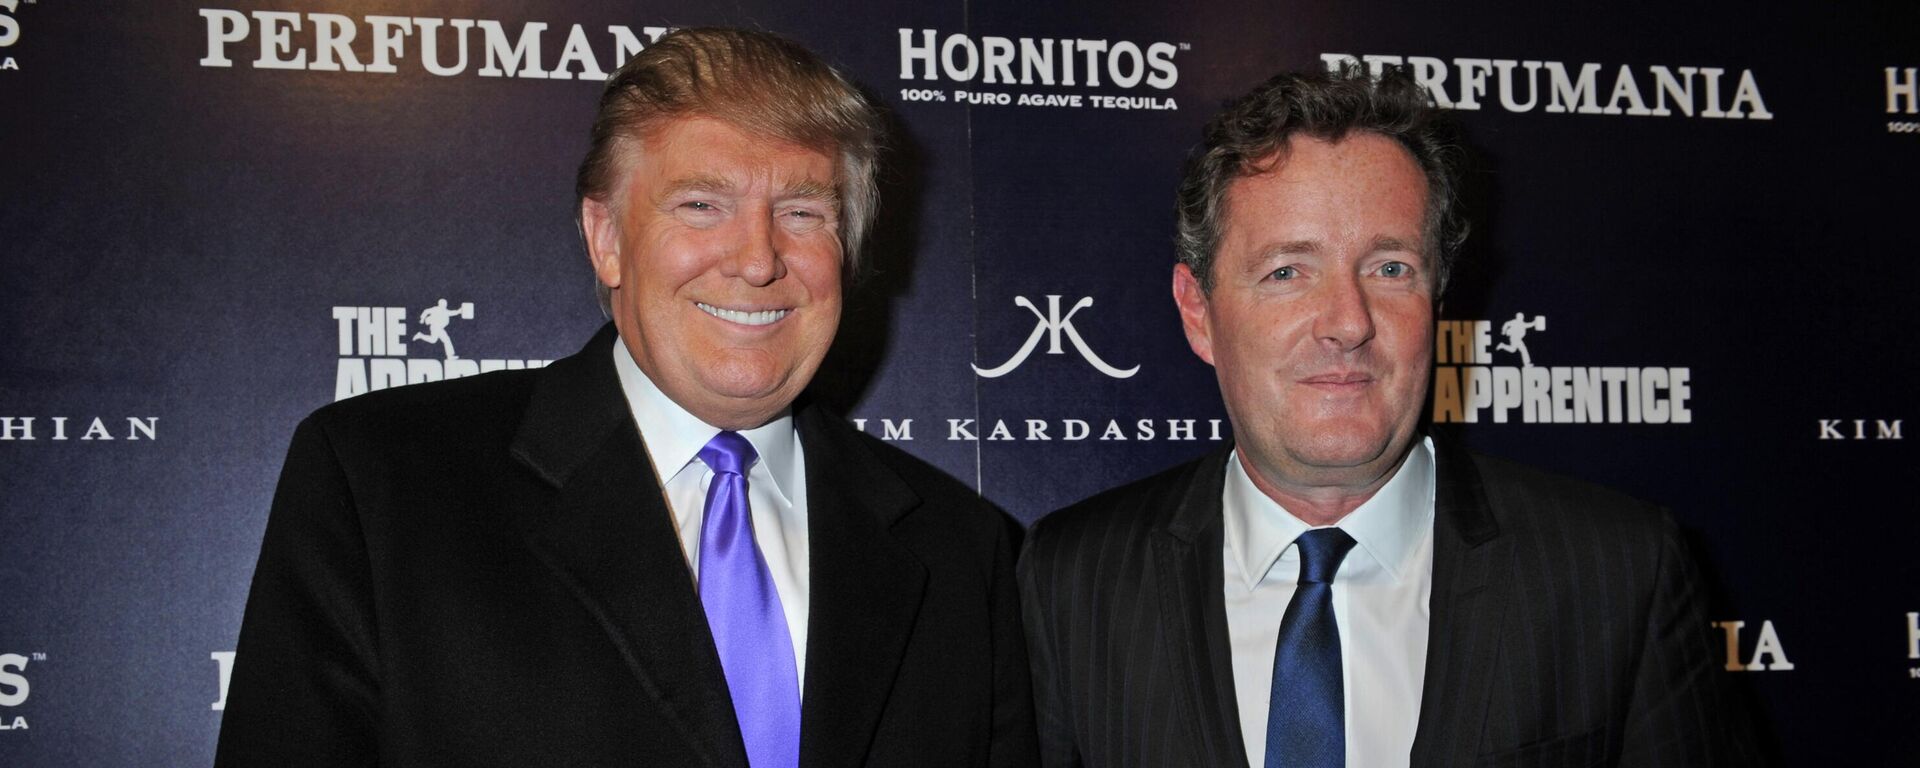 Donald Trump, left, and Piers Morgan arrive for the Perfumania party celebrating the appearance of Kim Kardashian on the reality show The Apprentice, Wednesday, Nov. 10, 2010, in New York. - Sputnik International, 1920, 21.04.2022